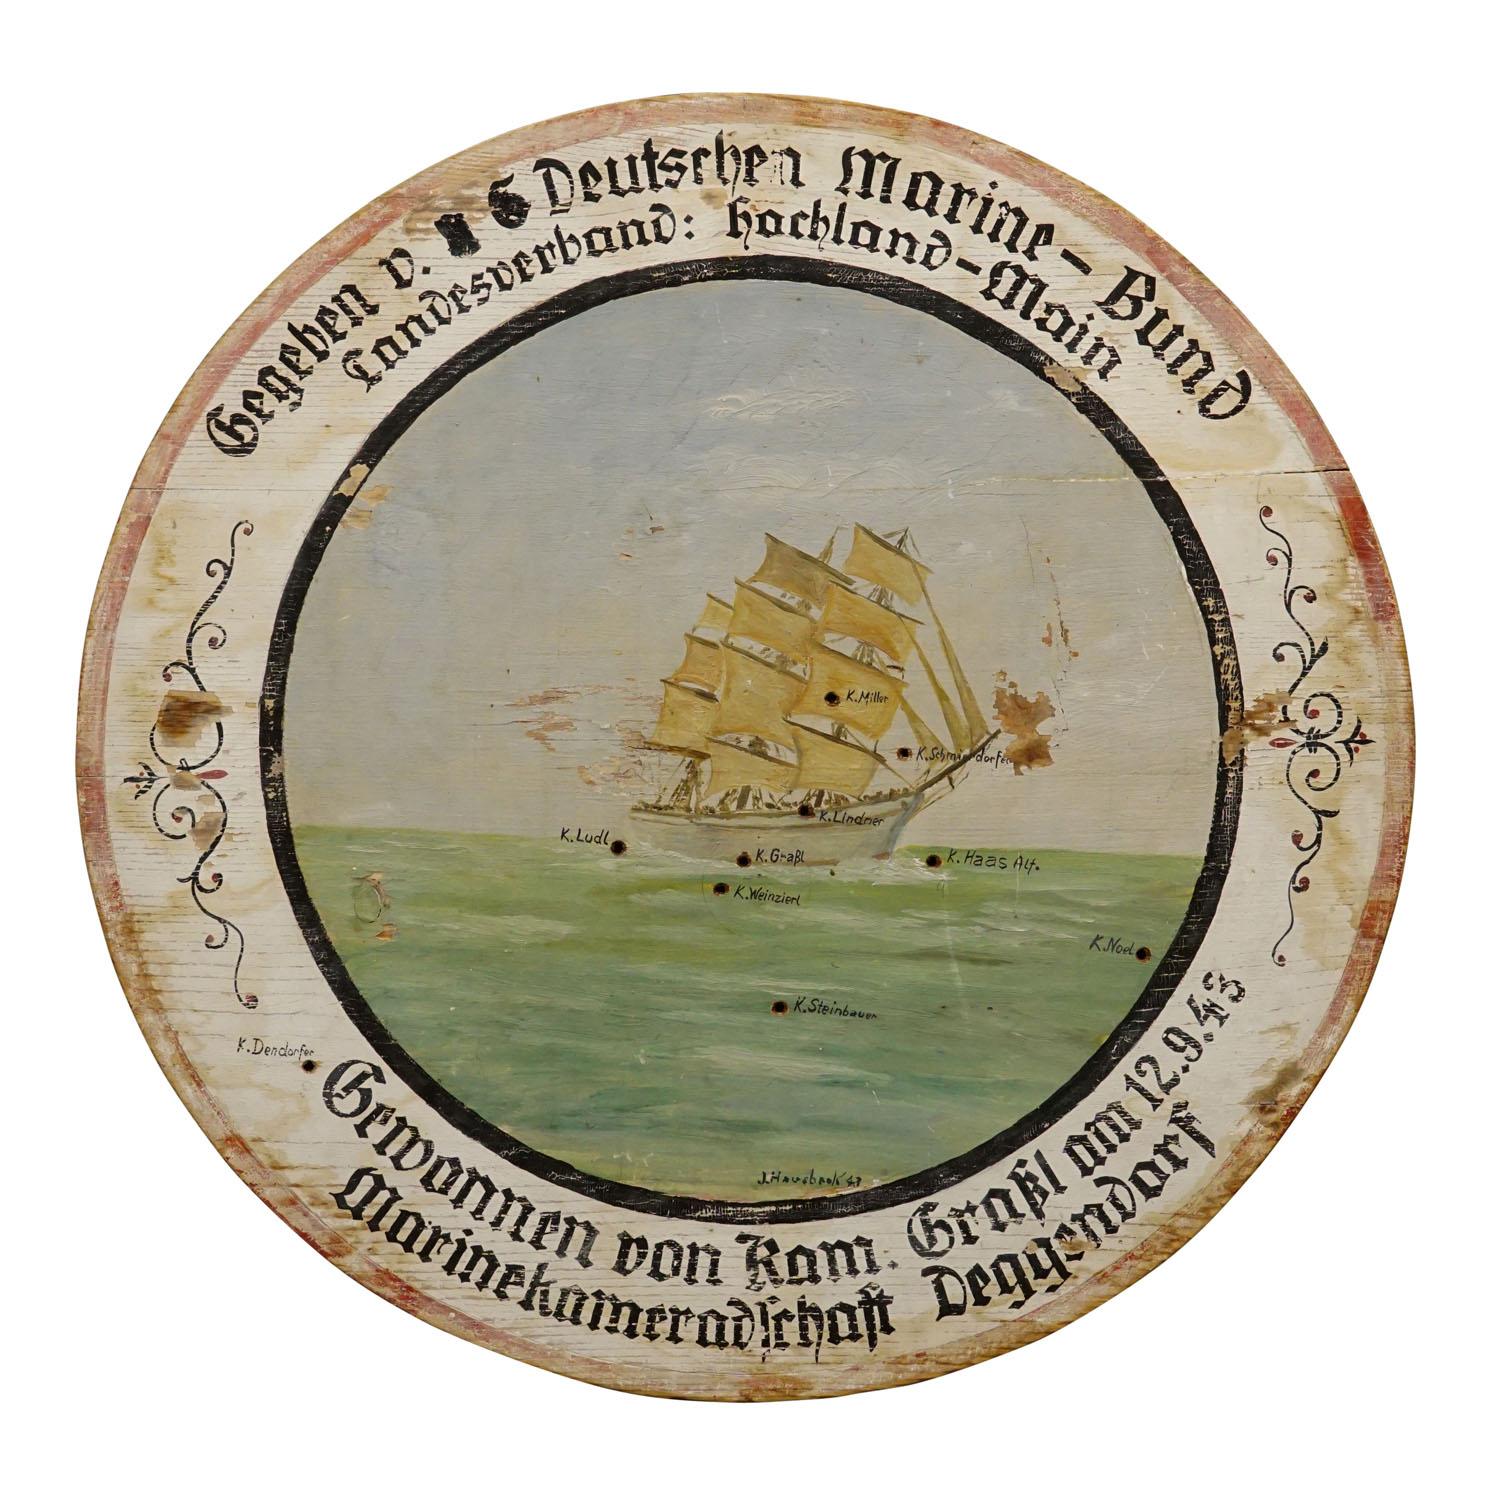 German Navy League Shooting Target Plaque with Sailing Ship 1943

An antique wooden shooting target plaque with handpainted illustration of a sailing ship. With handwritten inscriptions 